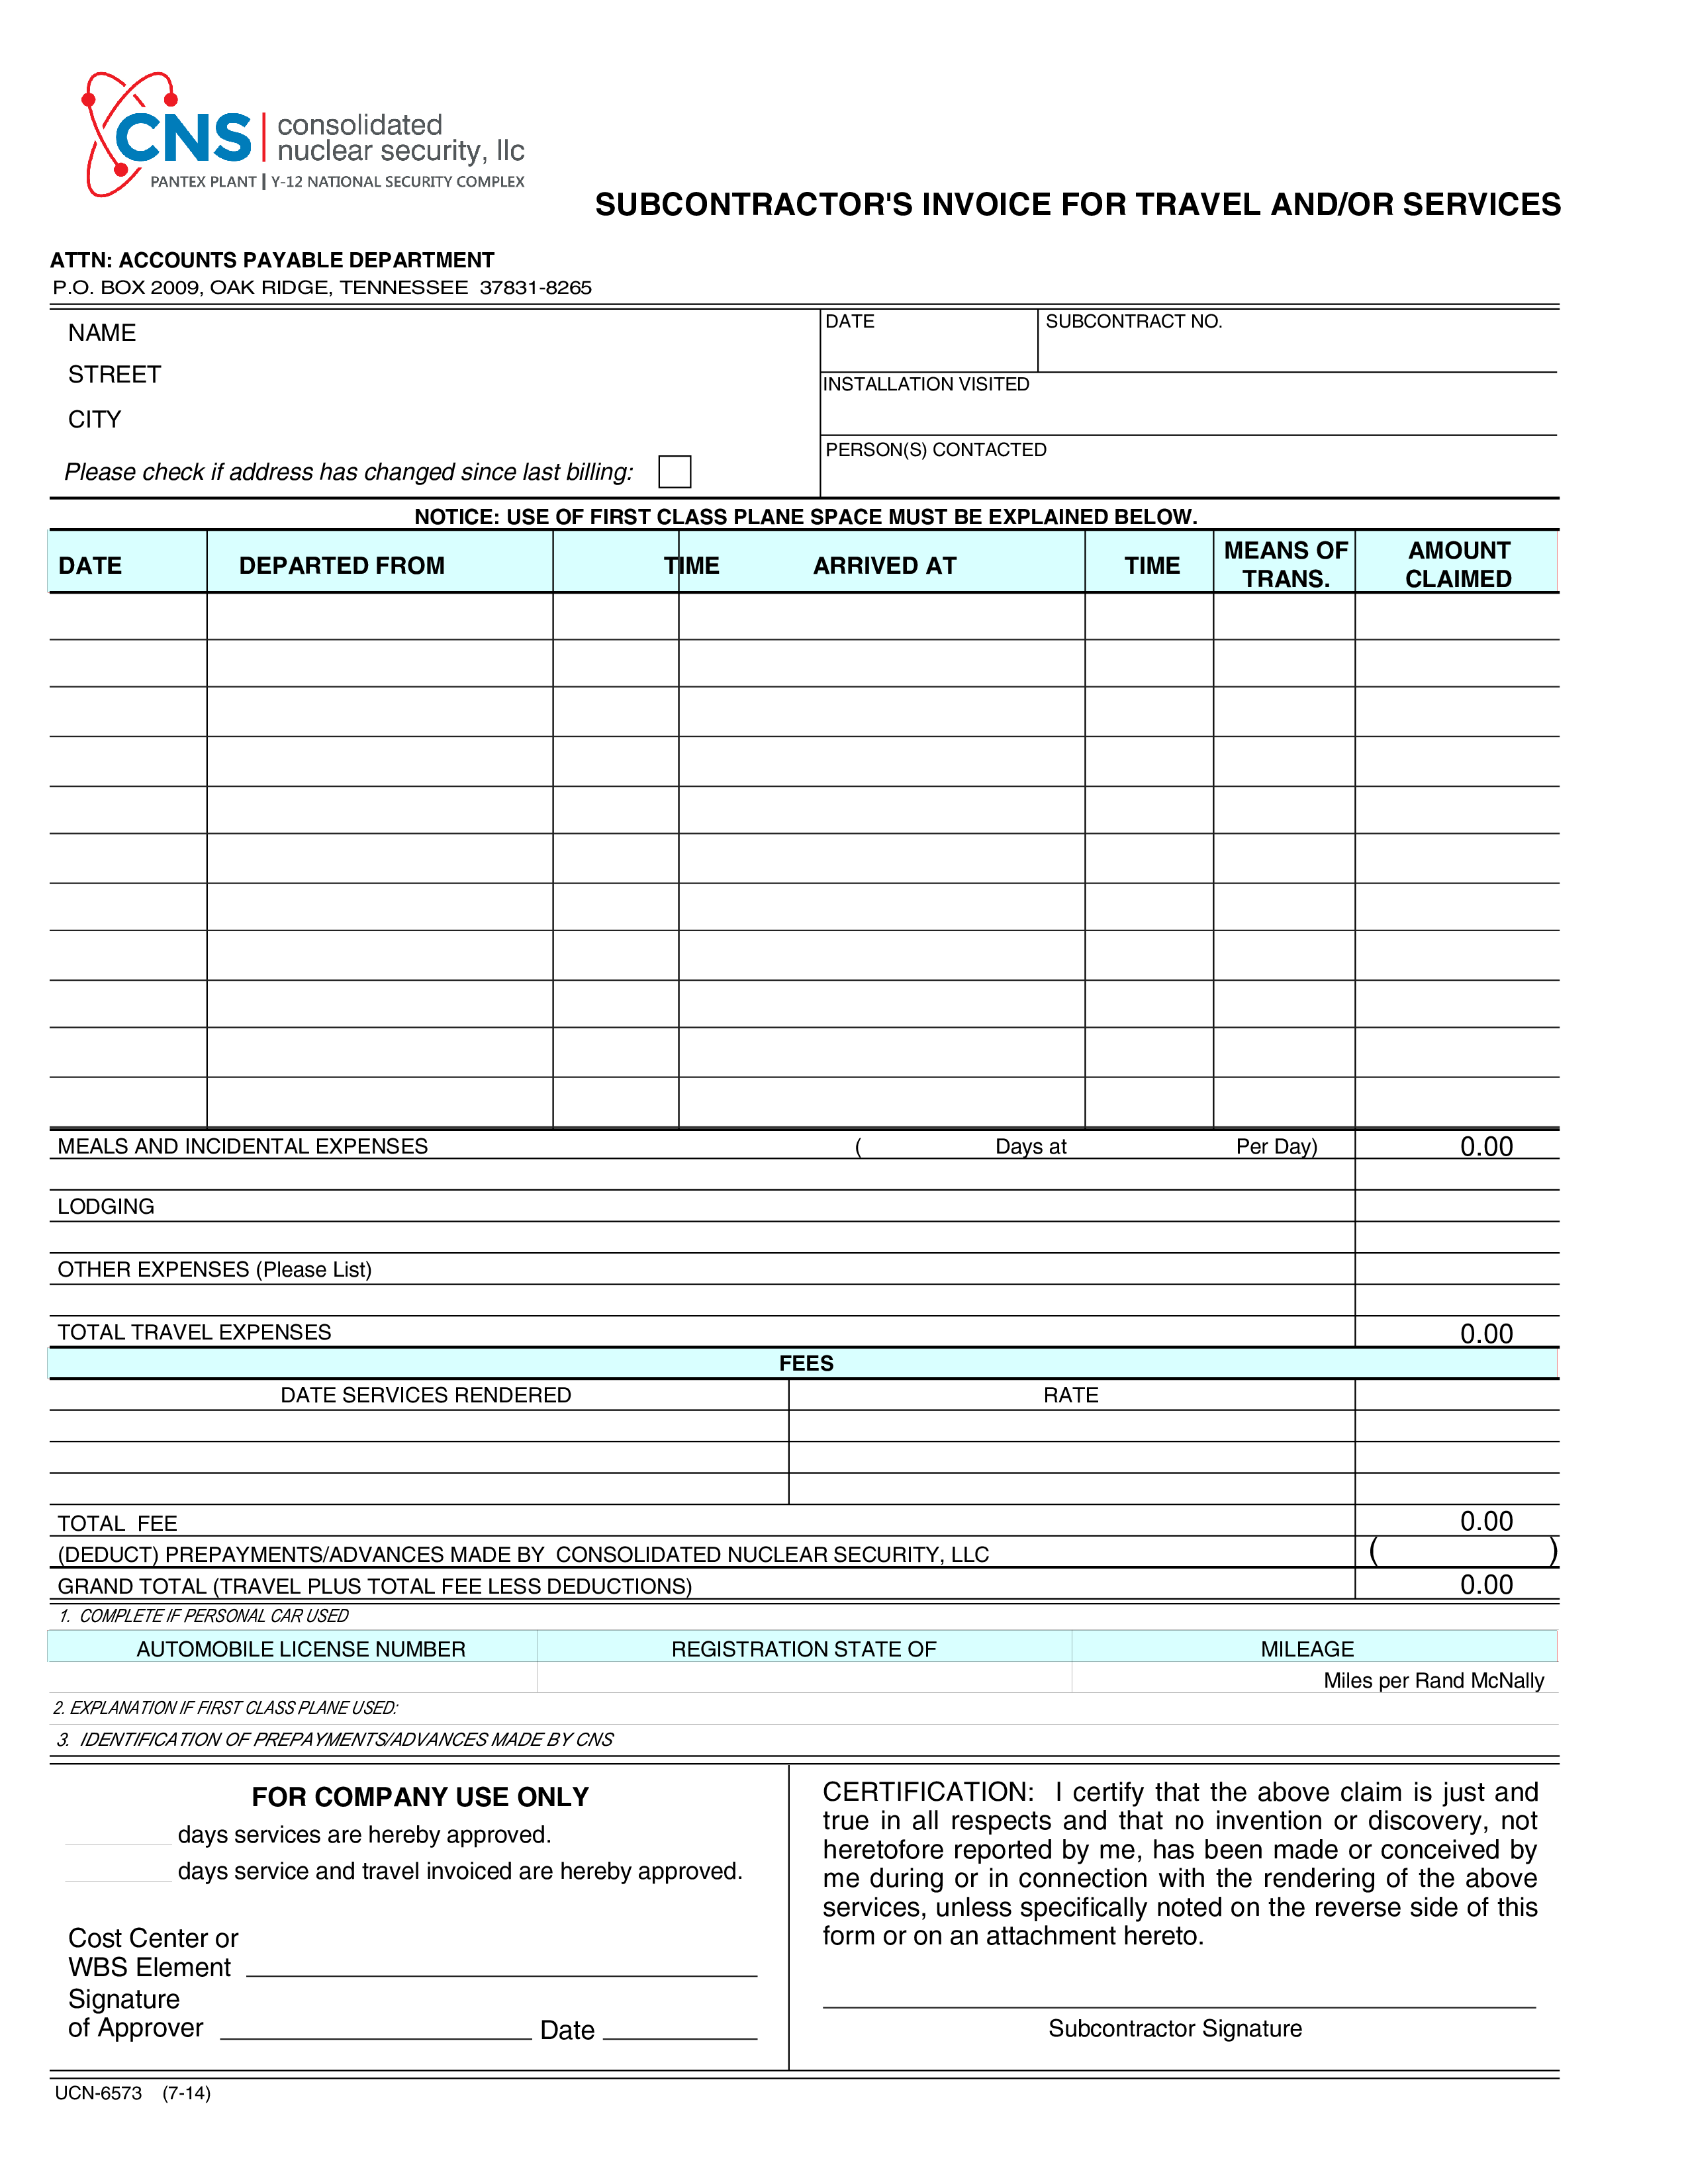 subcontractor invoice for travel and/or services Hauptschablonenbild